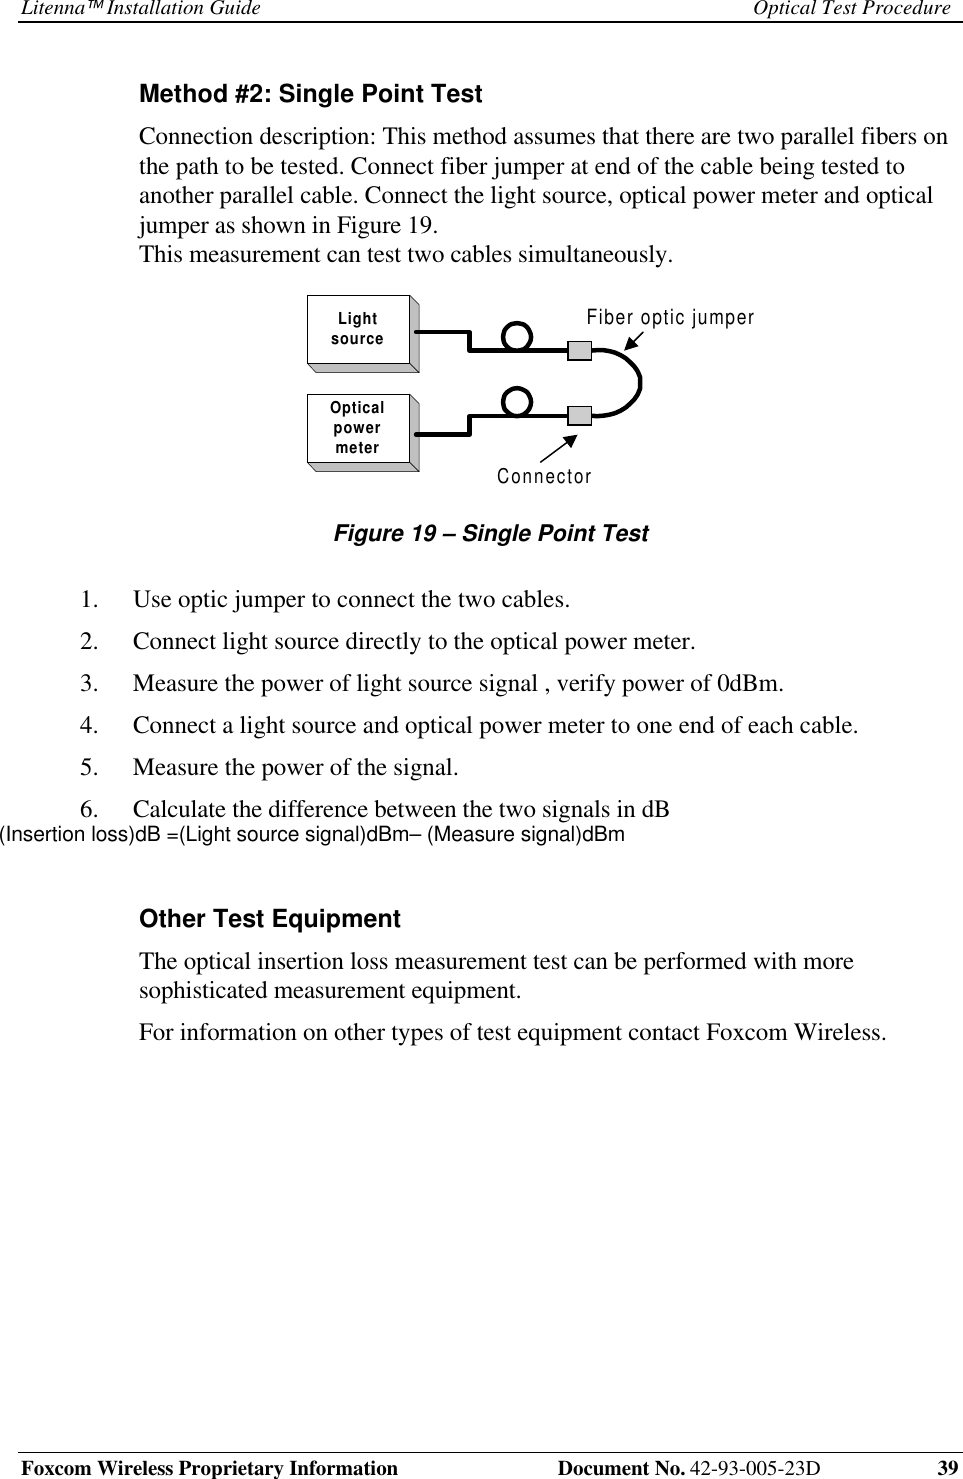 Litenna Installation Guide Optical Test ProcedureFoxcom Wireless Proprietary Information  Document No. 42-93-005-23D 39Method #2: Single Point TestConnection description: This method assumes that there are two parallel fibers onthe path to be tested. Connect fiber jumper at end of the cable being tested toanother parallel cable. Connect the light source, optical power meter and opticaljumper as shown in Figure 19.This measurement can test two cables simultaneously.LightsourceOpticalpowermeterConnectorFiber optic jumperFigure 19 – Single Point Test1.  Use optic jumper to connect the two cables.2.  Connect light source directly to the optical power meter.3.  Measure the power of light source signal , verify power of 0dBm.4.  Connect a light source and optical power meter to one end of each cable.5.  Measure the power of the signal.6.  Calculate the difference between the two signals in dBOther Test EquipmentThe optical insertion loss measurement test can be performed with moresophisticated measurement equipment.For information on other types of test equipment contact Foxcom Wireless.(Insertion loss)dB =(Light source signal)dBm– (Measure signal)dBm